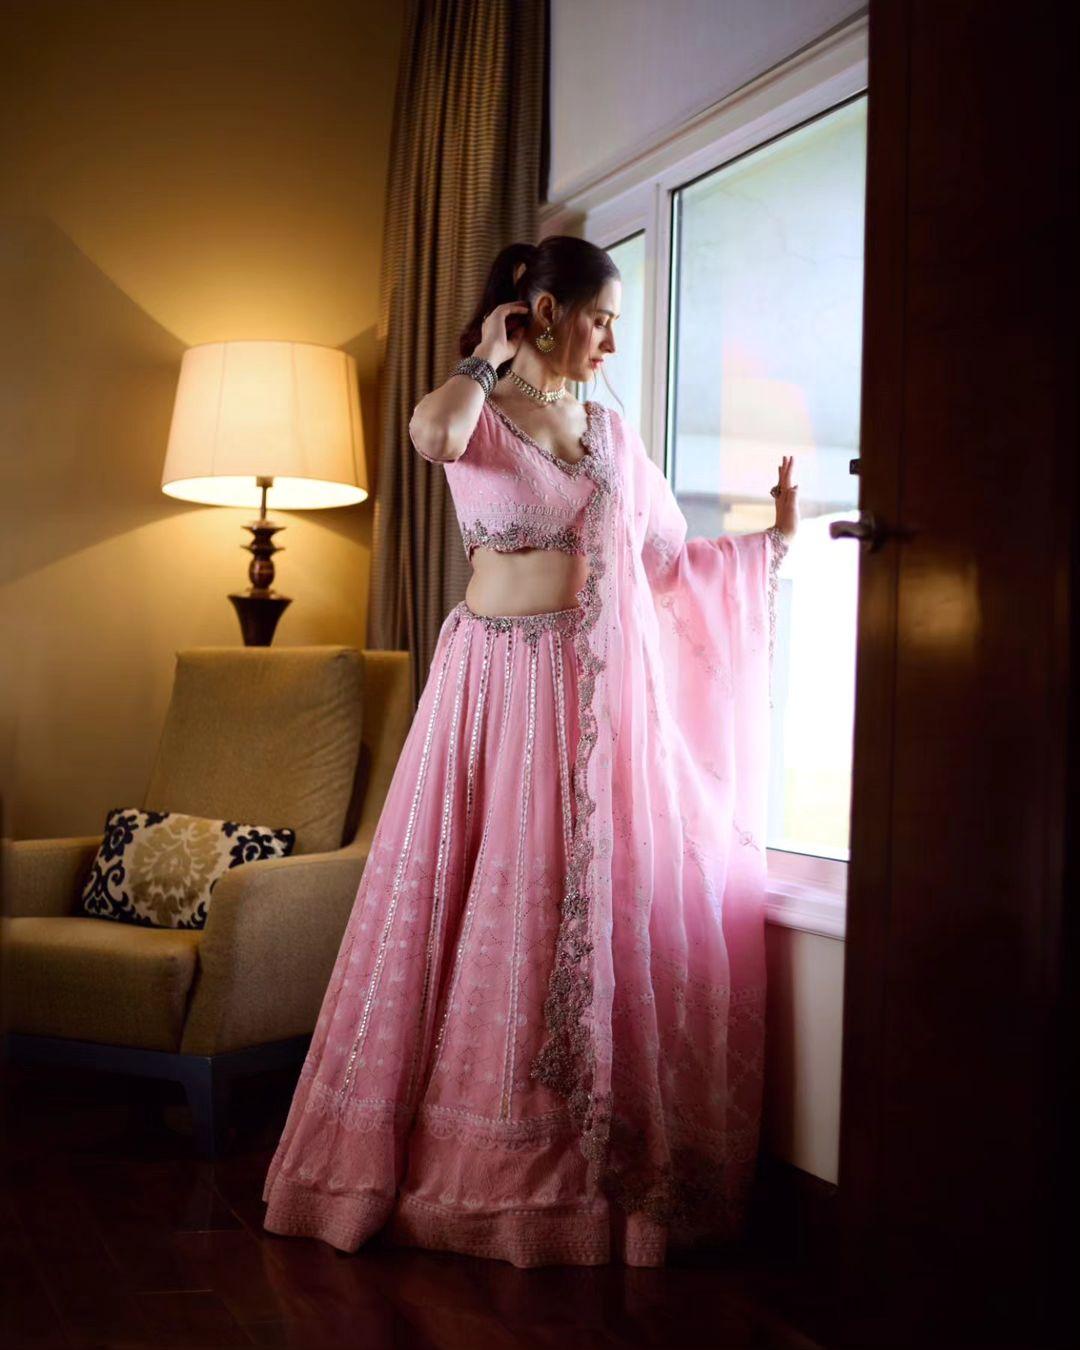 Sanjeeda looked amazing in a pink lehenga, with her hair tied back in a neat ponytail.